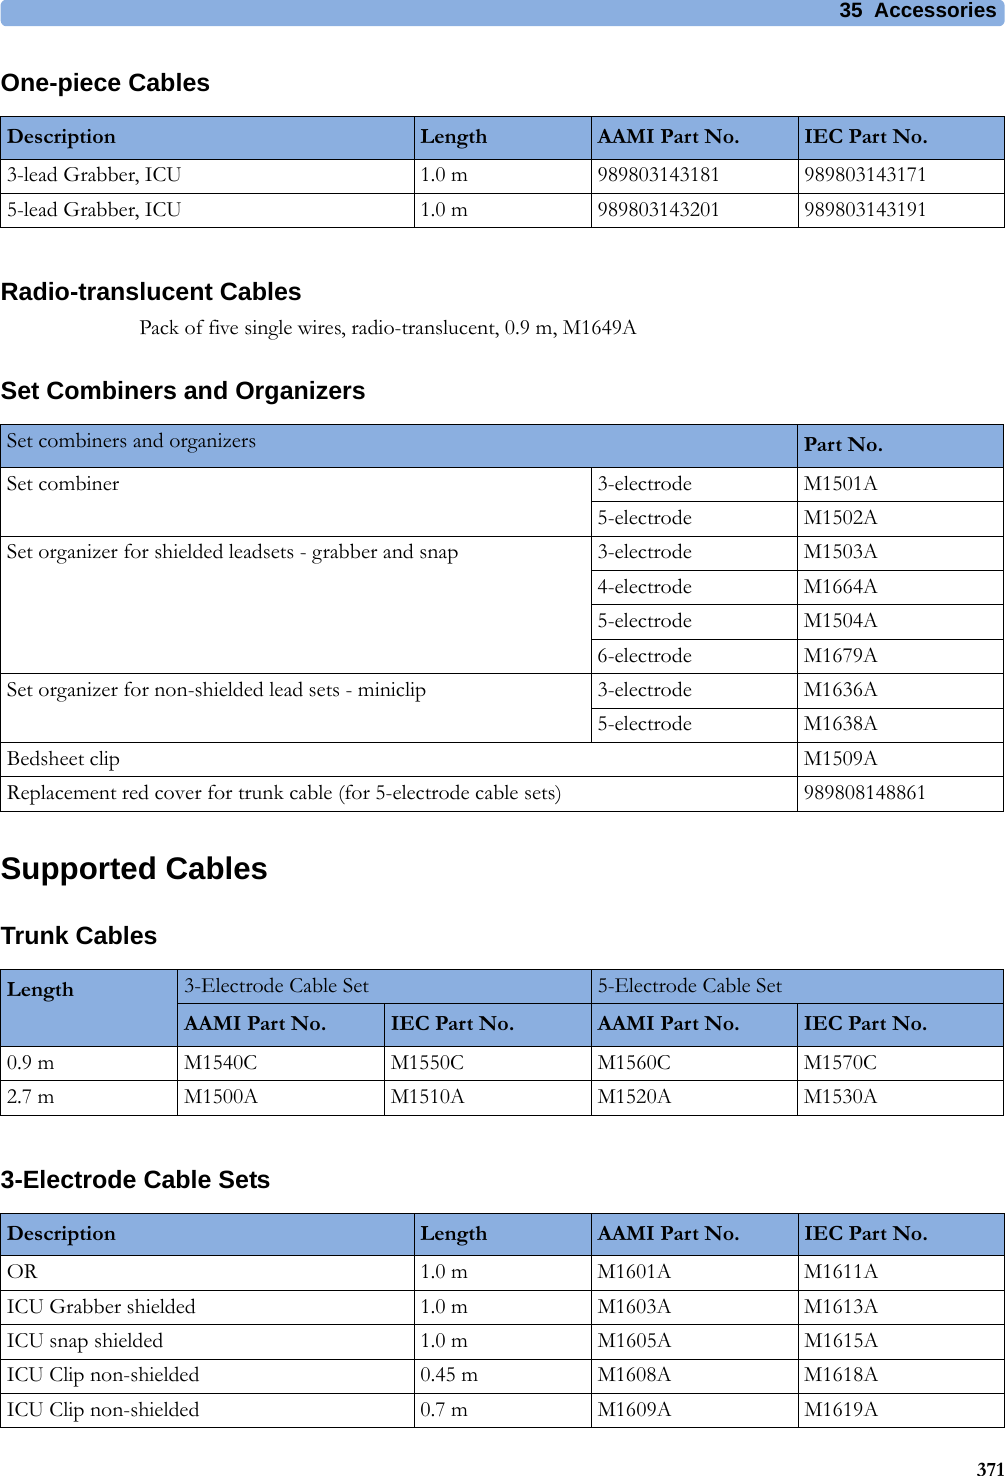 35 Accessories371One-piece CablesRadio-translucent CablesPack of five single wires, radio-translucent, 0.9 m, M1649ASet Combiners and OrganizersSupported CablesTrunk Cables3-Electrode Cable SetsDescription Length AAMI Part No. IEC Part No.3-lead Grabber, ICU 1.0 m 989803143181 9898031431715-lead Grabber, ICU 1.0 m 989803143201 989803143191Set combiners and organizers Part No.Set combiner 3-electrode M1501A5-electrode M1502ASet organizer for shielded leadsets - grabber and snap 3-electrode M1503A4-electrode M1664A5-electrode M1504A6-electrode M1679ASet organizer for non-shielded lead sets - miniclip 3-electrode M1636A5-electrode M1638ABedsheet clip M1509AReplacement red cover for trunk cable (for 5-electrode cable sets) 989808148861Length 3-Electrode Cable Set 5-Electrode Cable SetAAMI Part No. IEC Part No. AAMI Part No. IEC Part No.0.9 m M1540C M1550C M1560C M1570C2.7 m M1500A M1510A M1520A M1530ADescription Length AAMI Part No. IEC Part No.OR 1.0 m M1601A M1611AICU Grabber shielded 1.0 m M1603A M1613AICU snap shielded 1.0 m M1605A M1615AICU Clip non-shielded 0.45 m M1608A M1618AICU Clip non-shielded 0.7 m M1609A M1619A